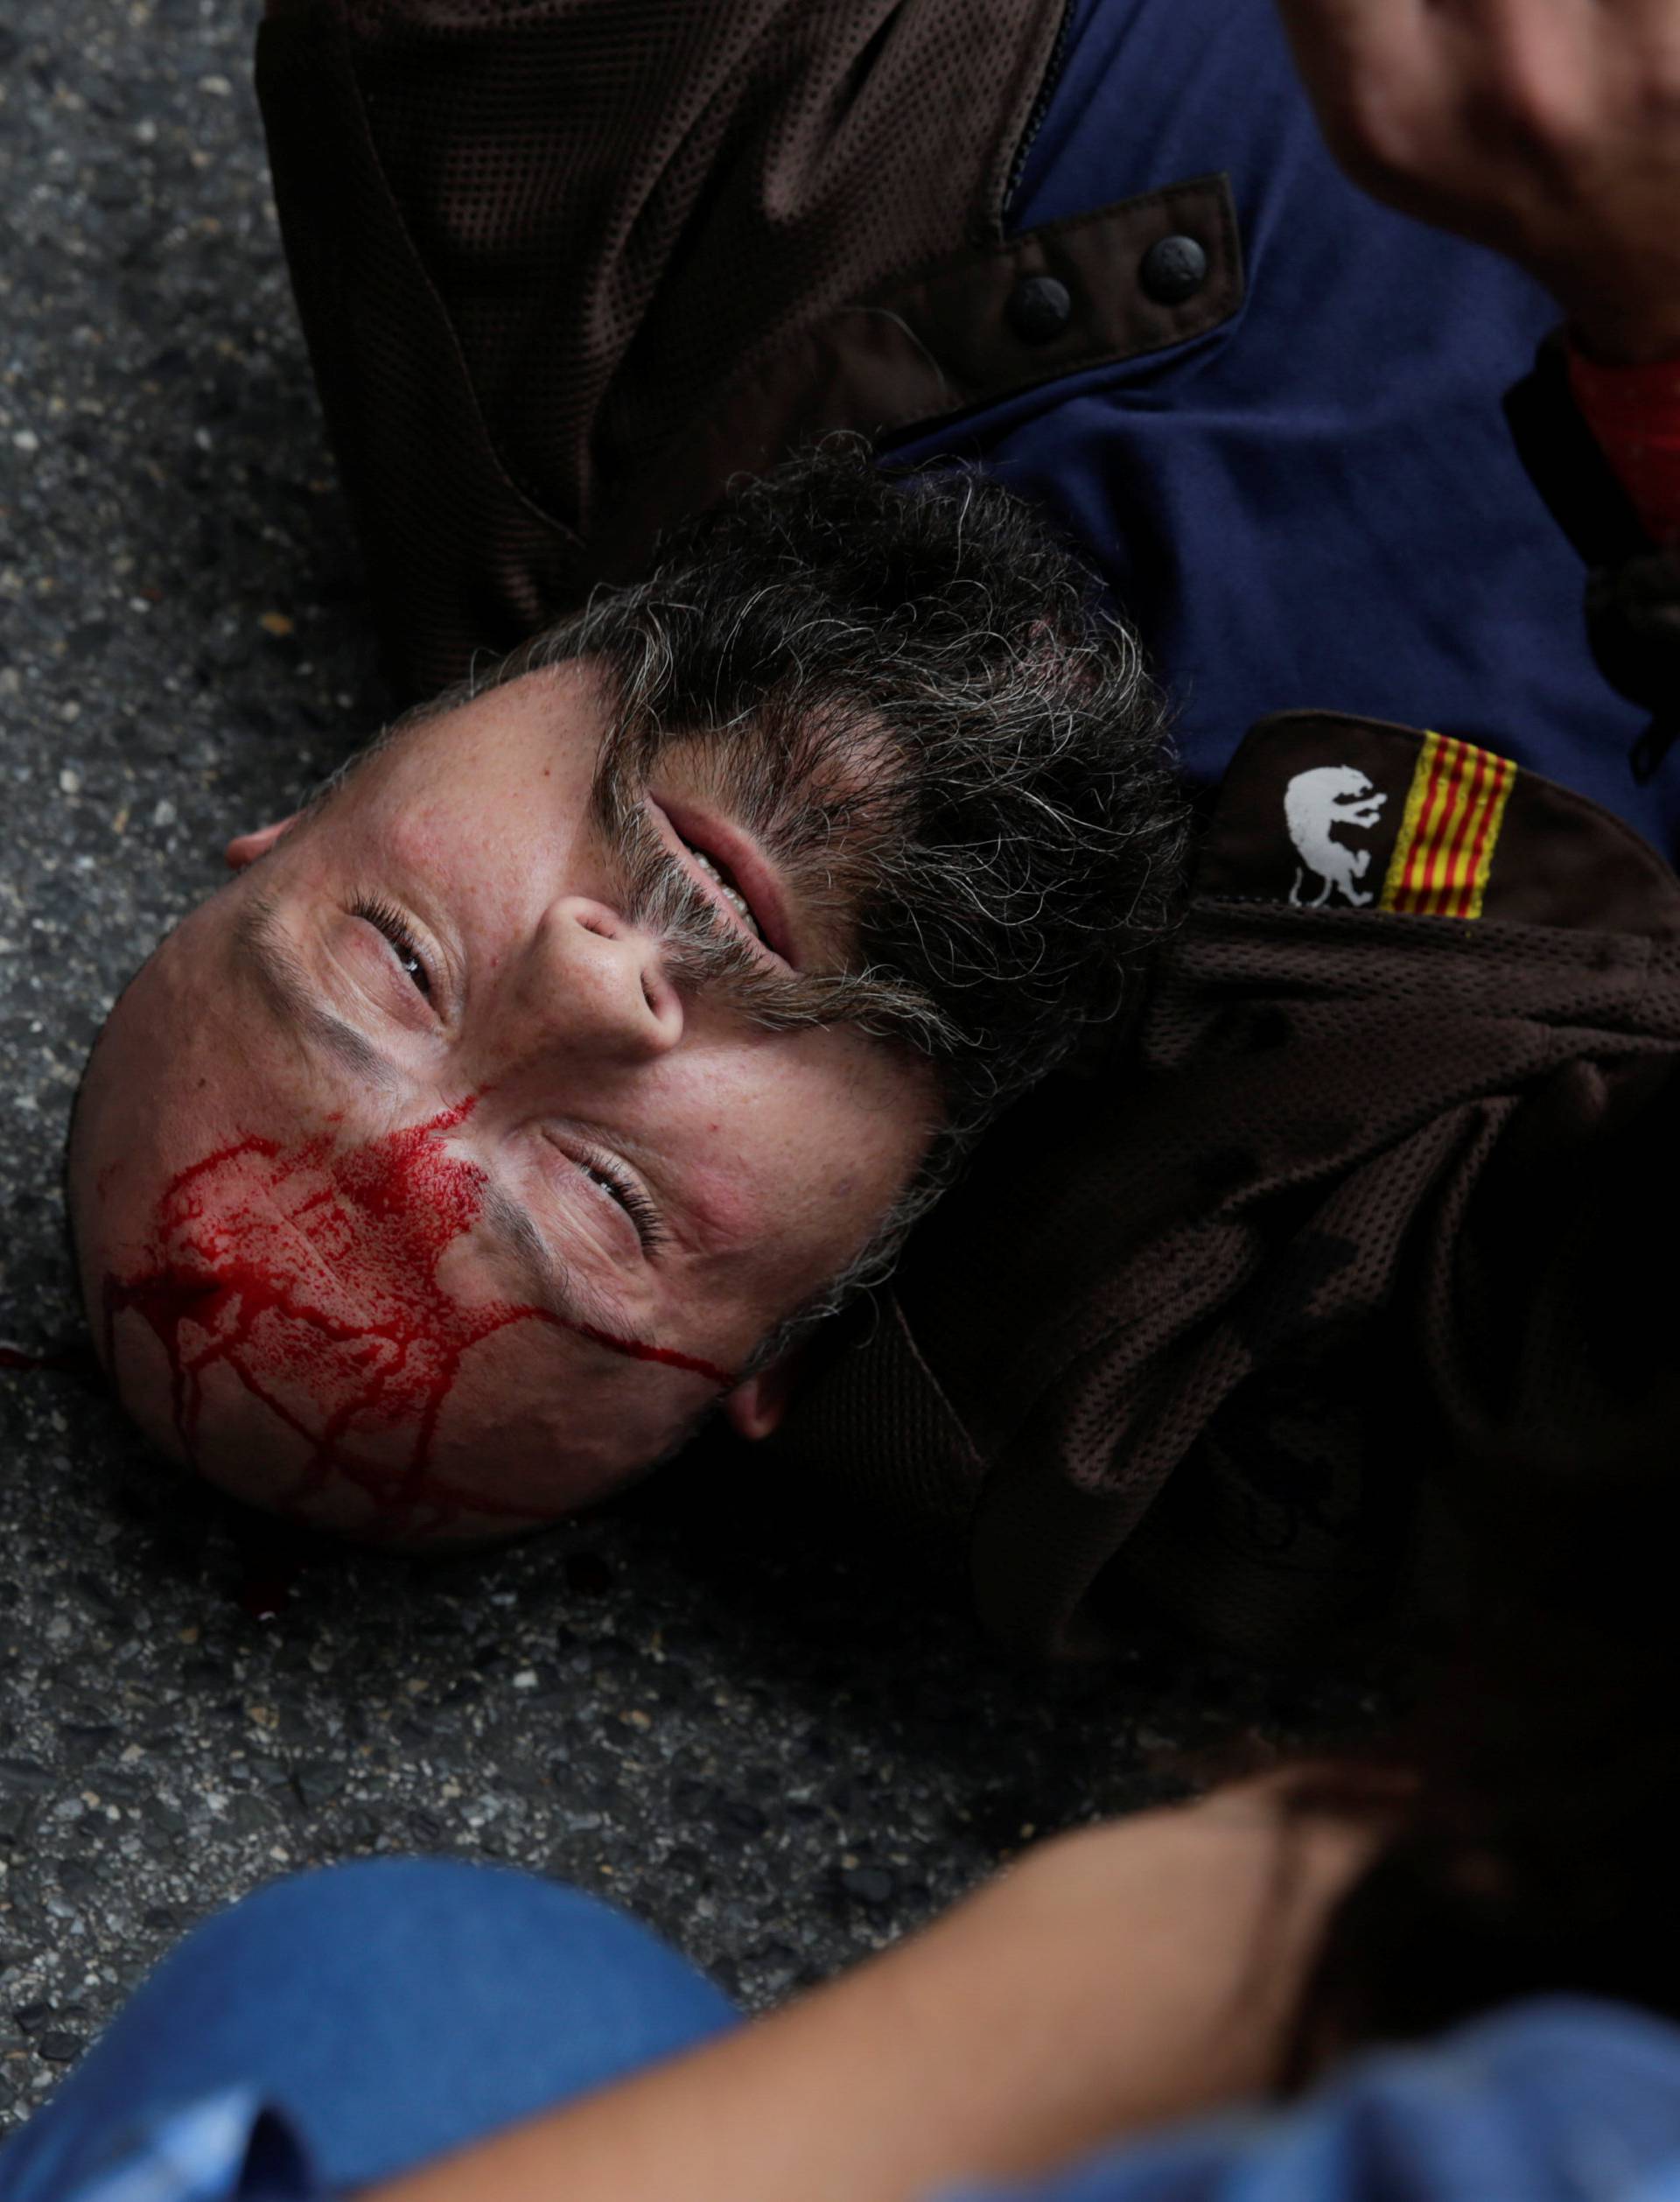 A man injured during clashes with Spanish police lies on the pavement outside a polling station for the banned independence referendum in Tarragona